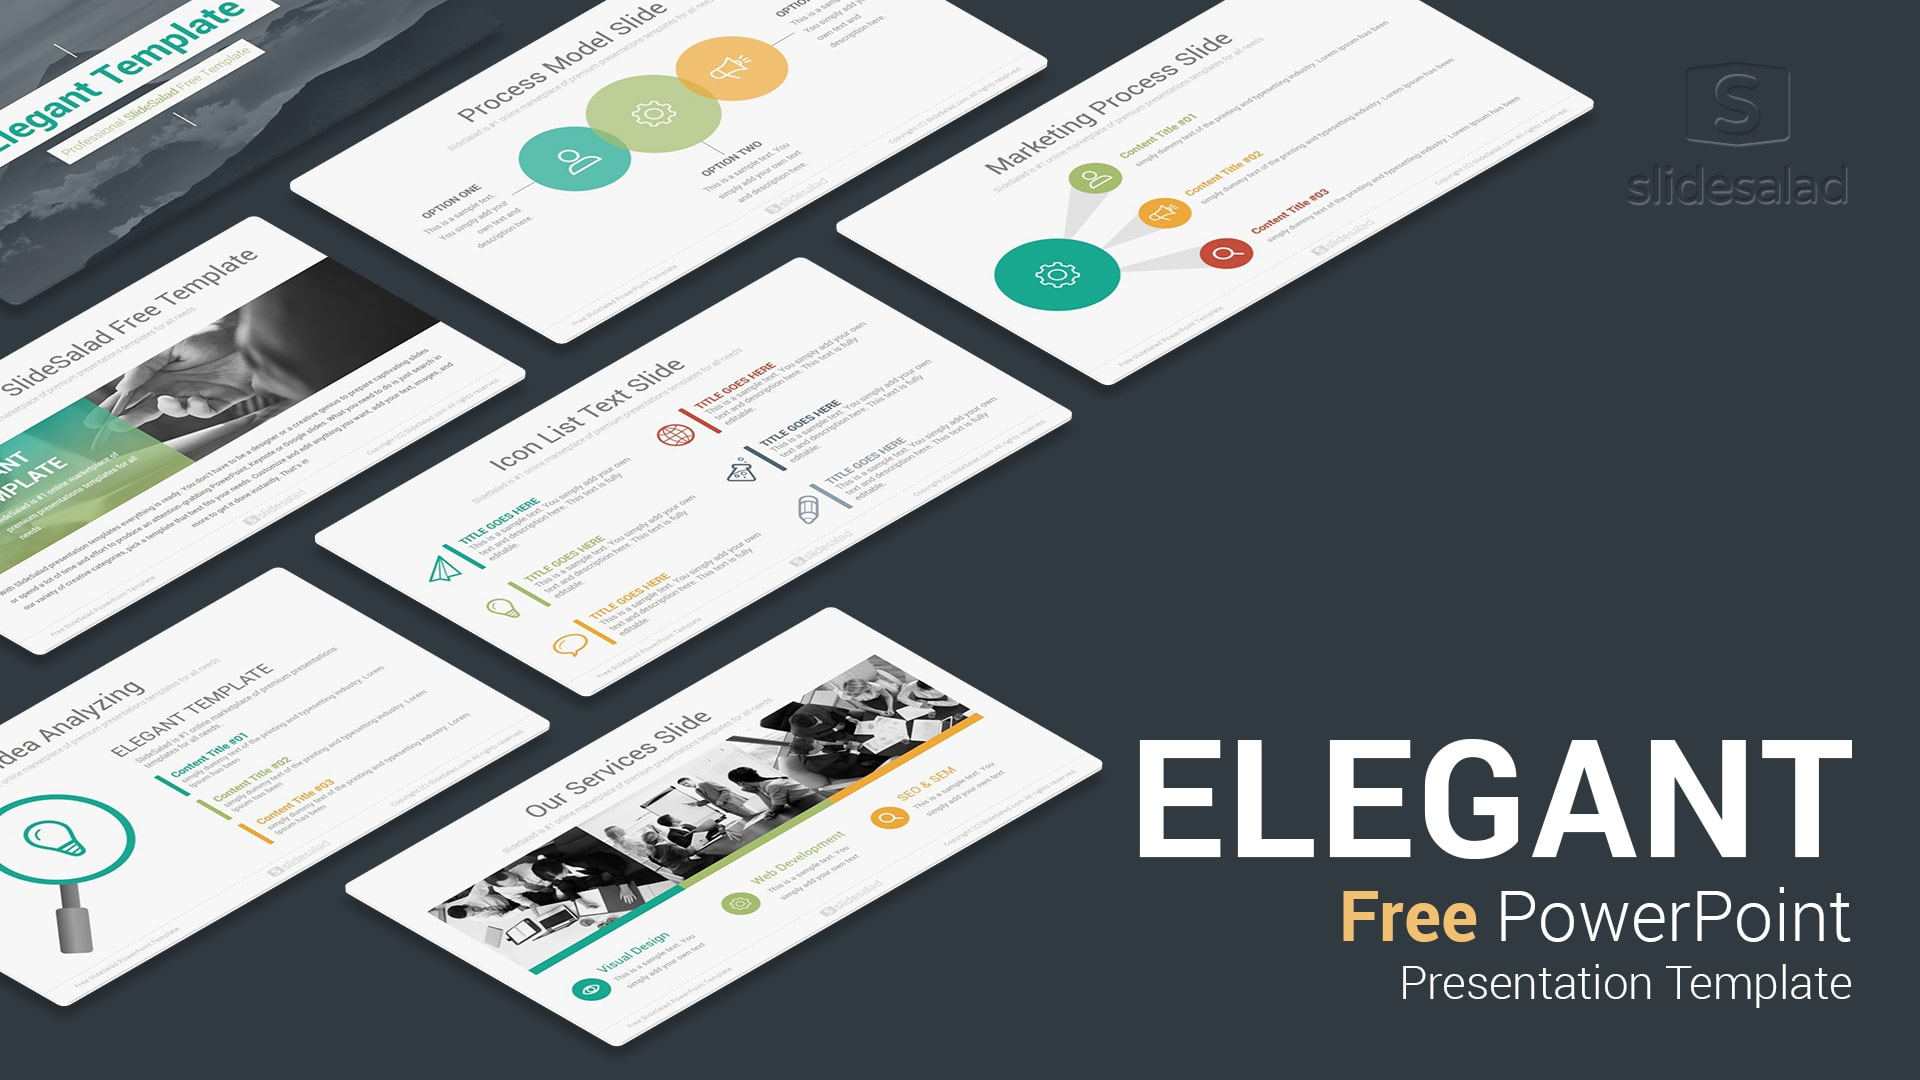 Best Free Presentation Templates Professional Designs 2019 With Powerpoint Sample Templates Free Download